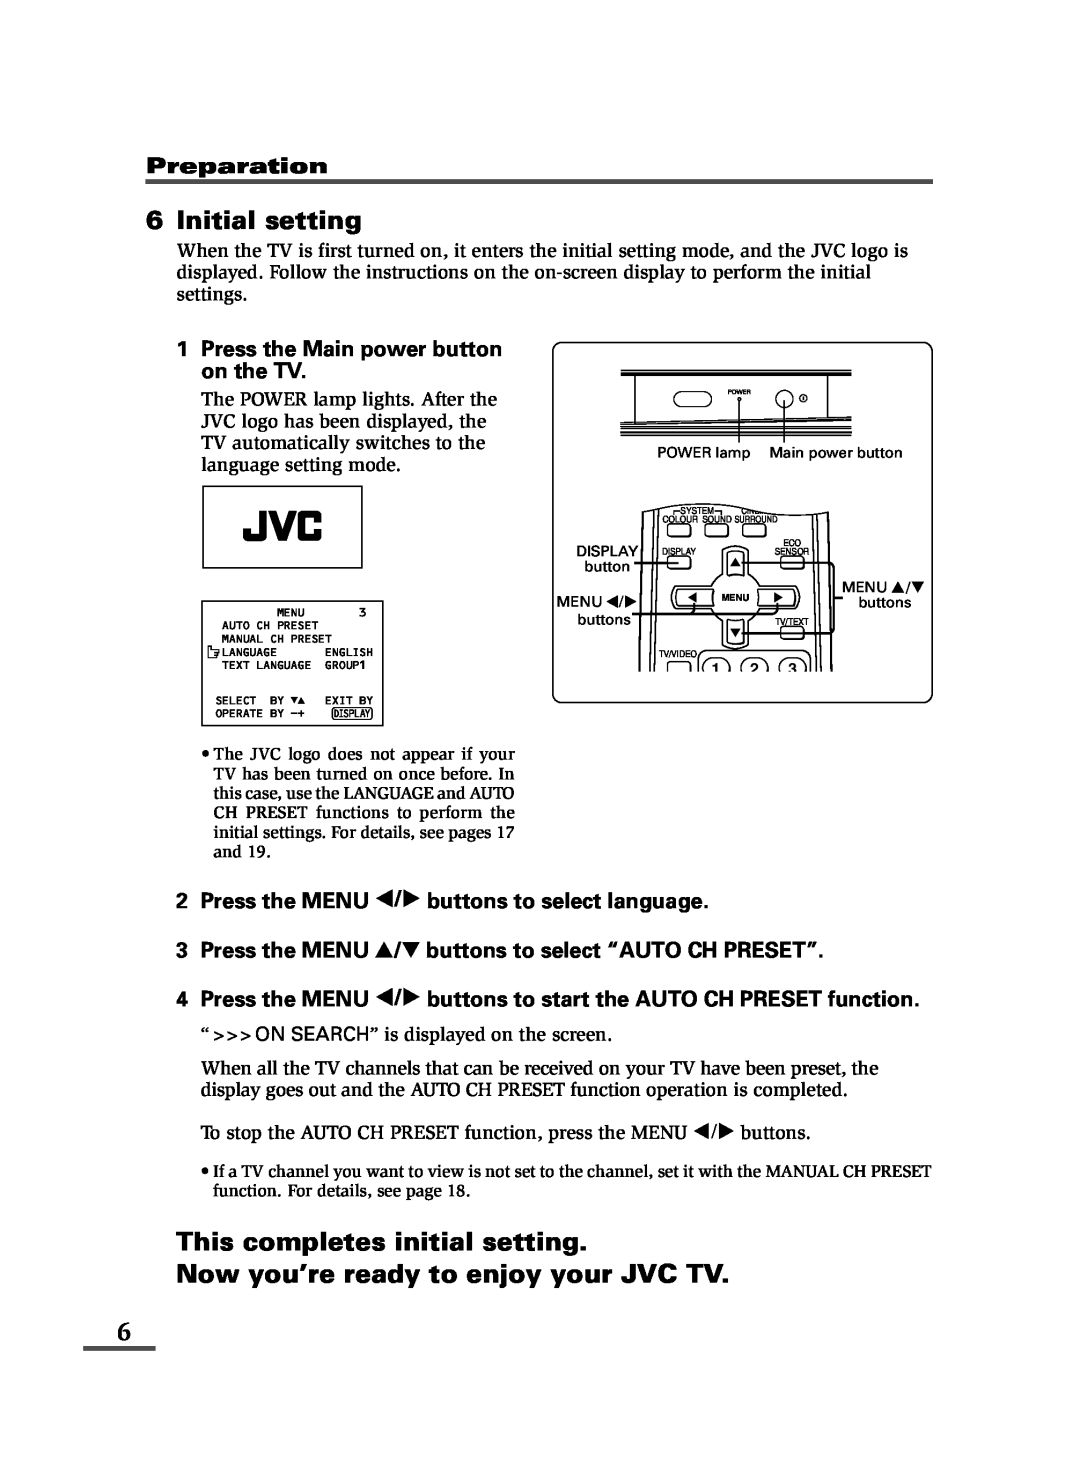 JVC specifications Initial setting, This completes initial setting Now you’re ready to enjoy your JVC TV, Preparation 